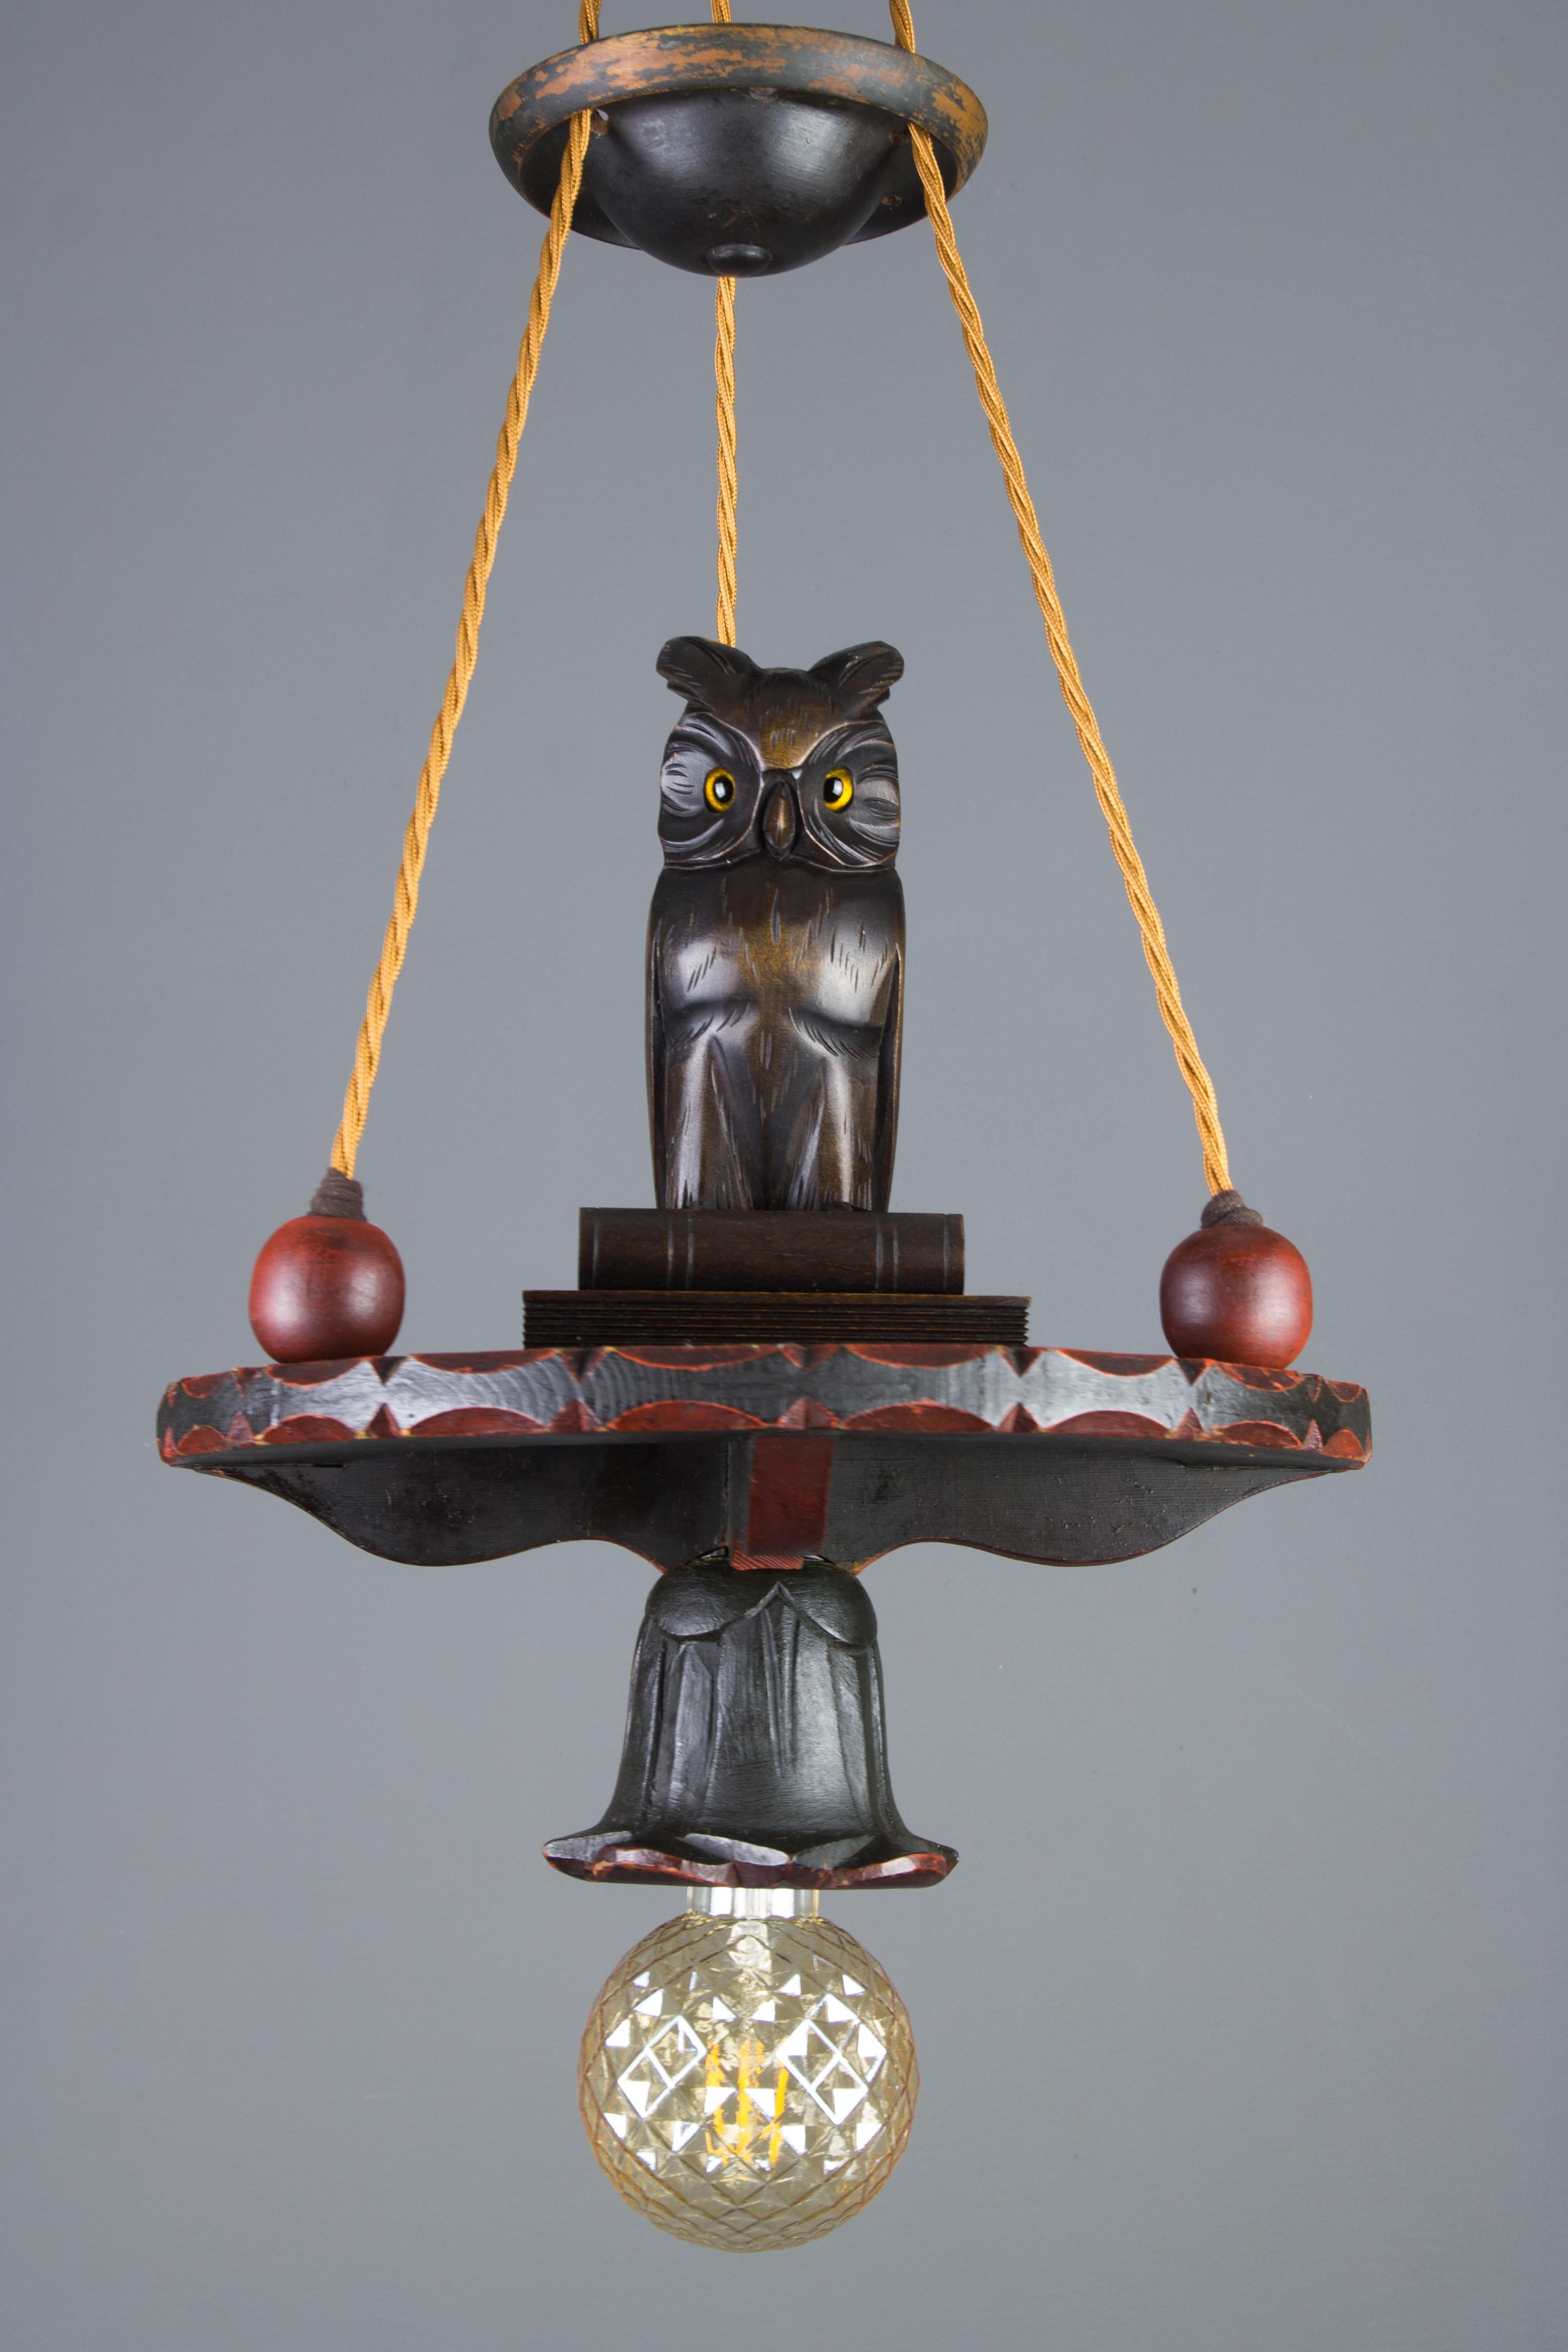 A beautiful hand-carved wooden pendant light, chandelier with an adorable, detailed carved sculpture of an owl, sitting on books in the center of the chandelier. In Greek mythology, a little owl (Athene noctua) traditionally represents or